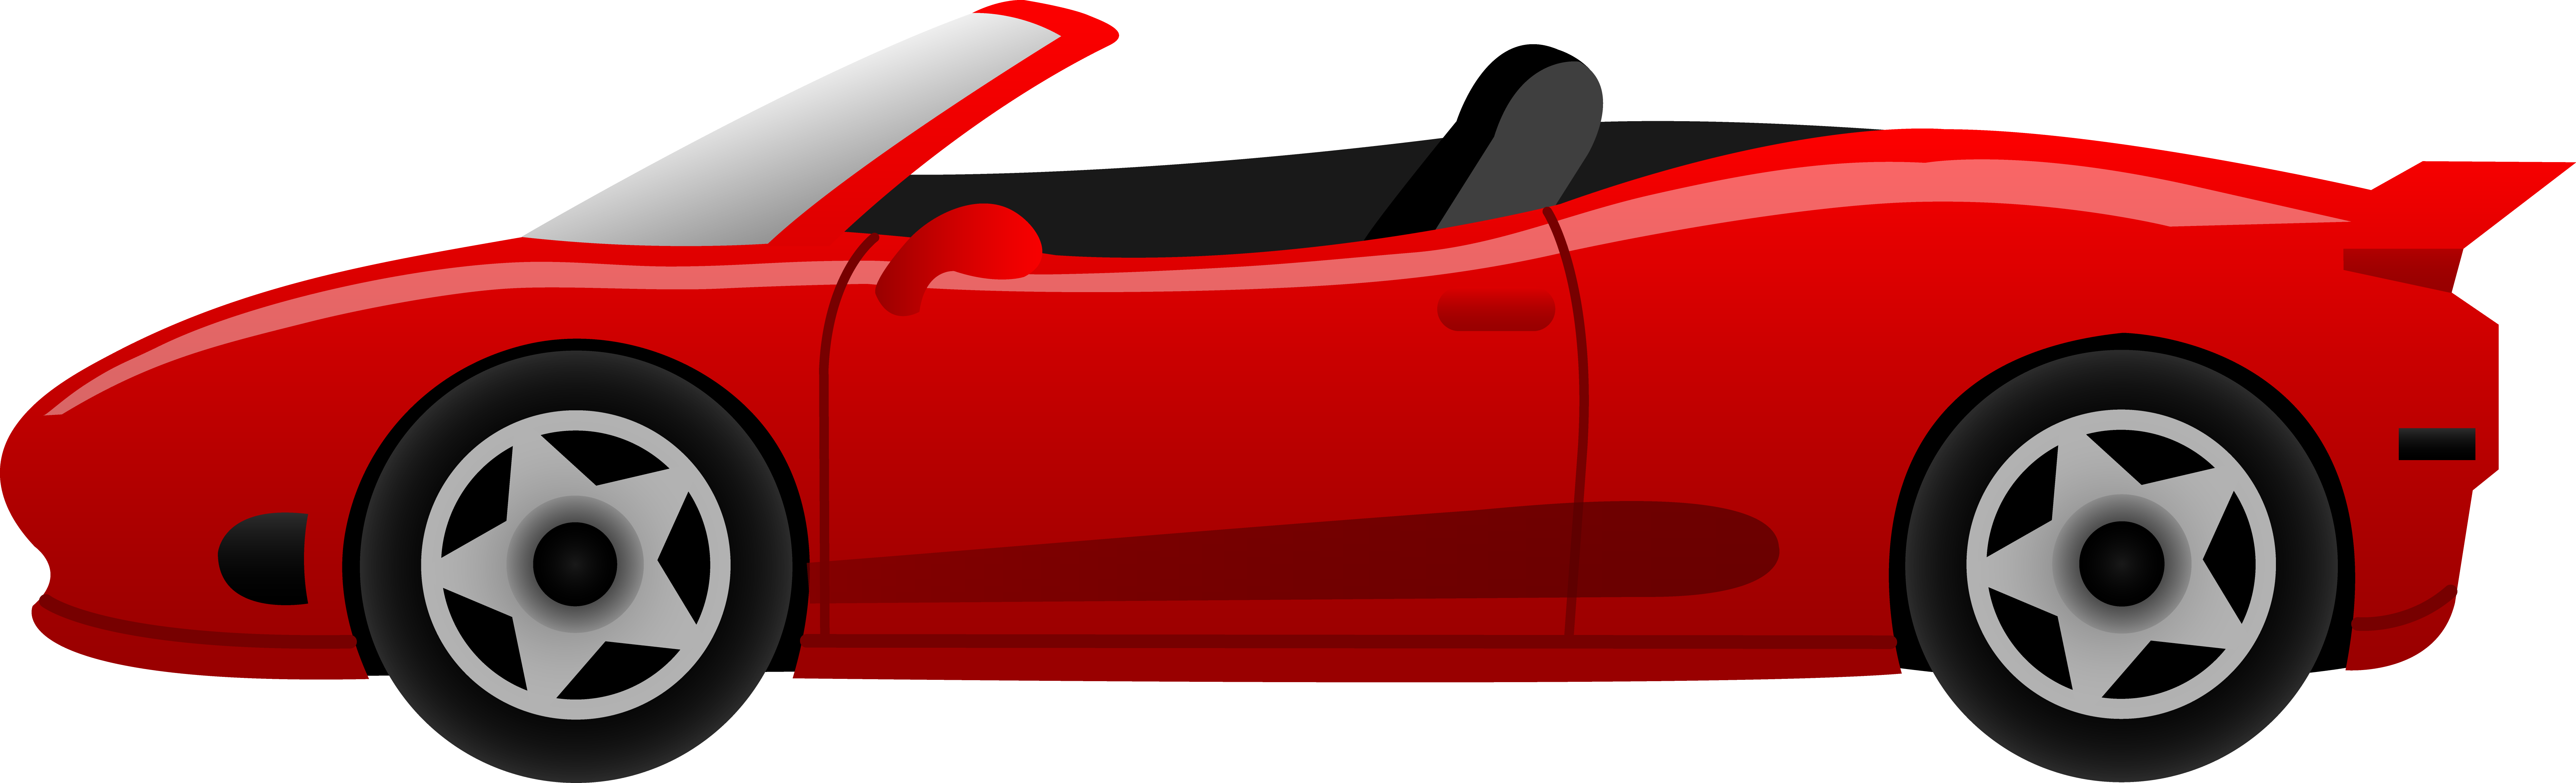 Cartoon car clip art free vector for free download about free 2